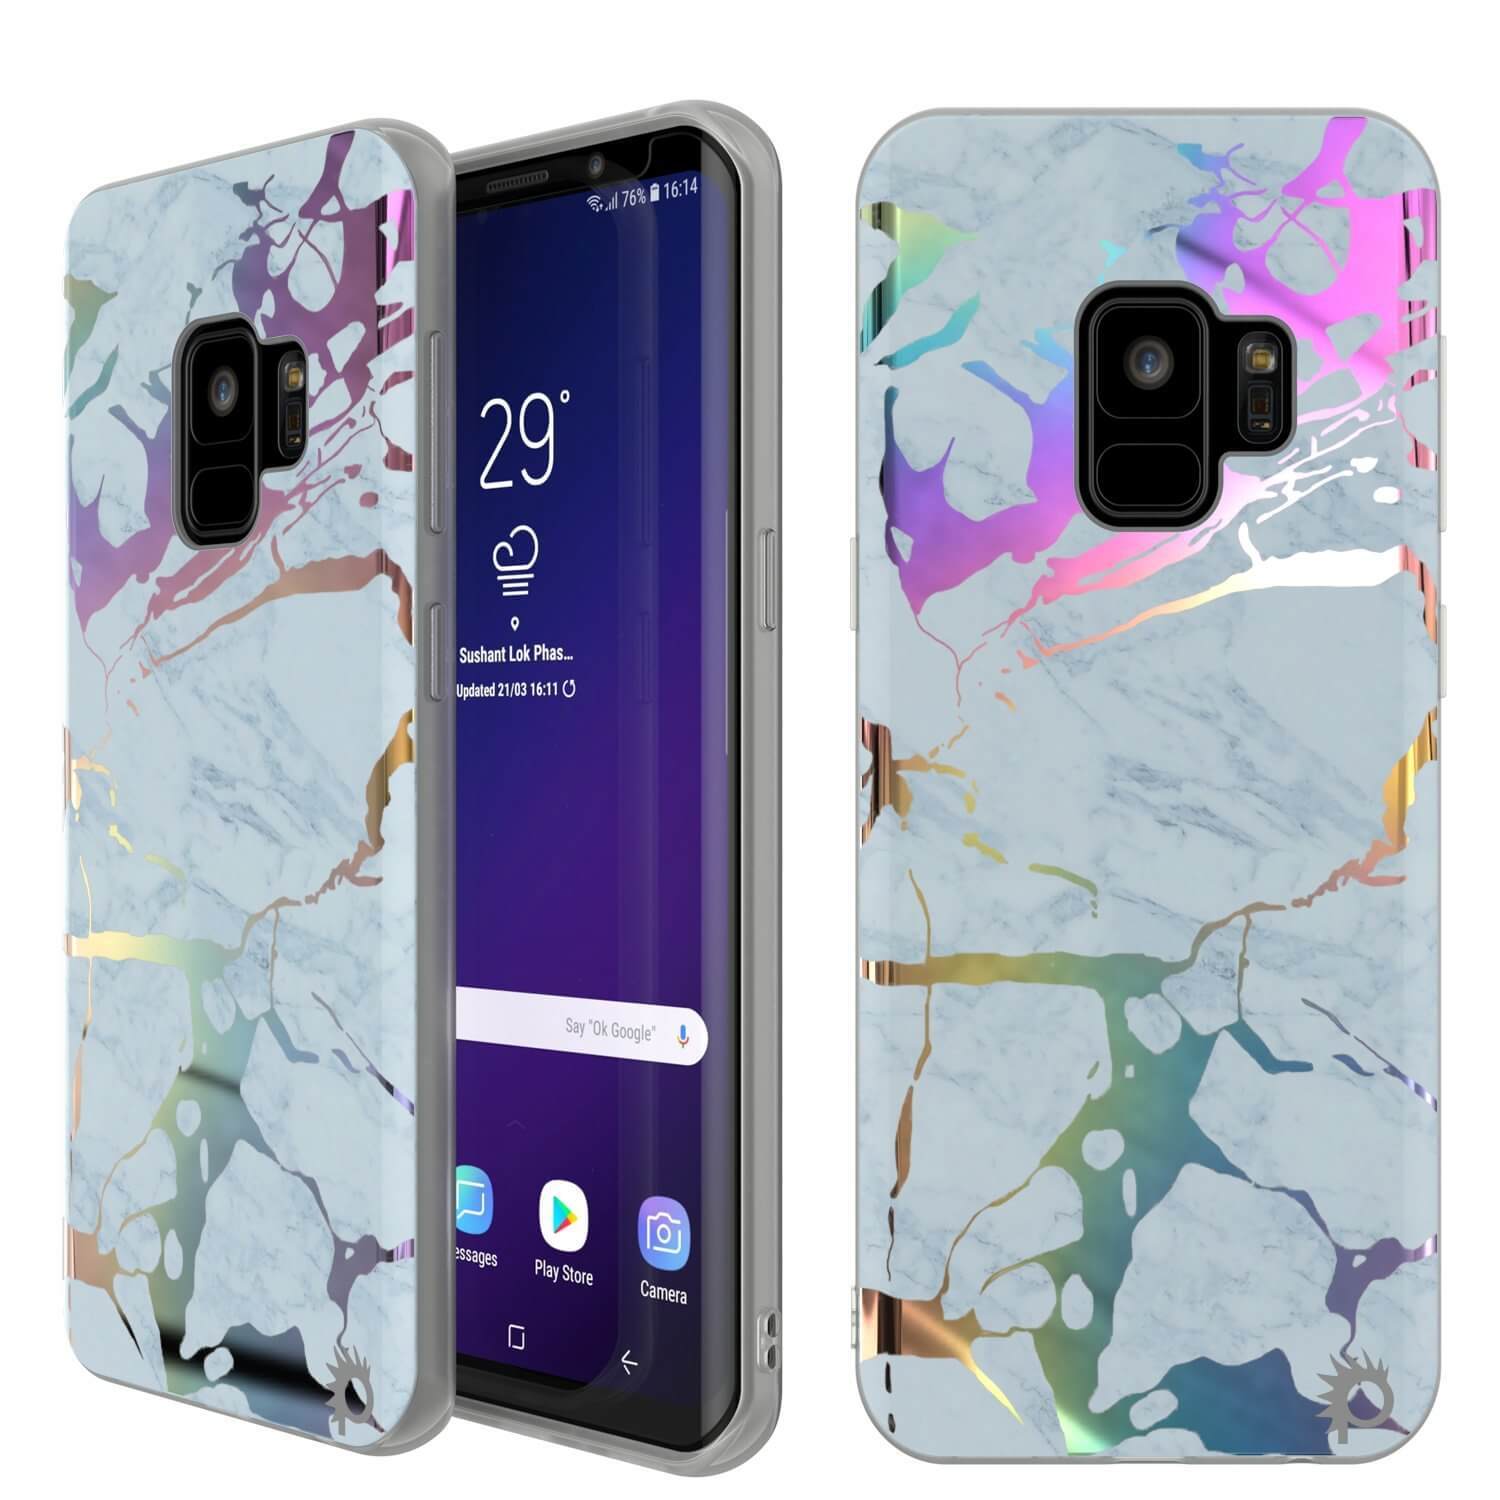 Punkcase Galaxy S9 Marble Case, Protective Full Body Cover W/PunkShield Screen Protector (Blue Marmo)